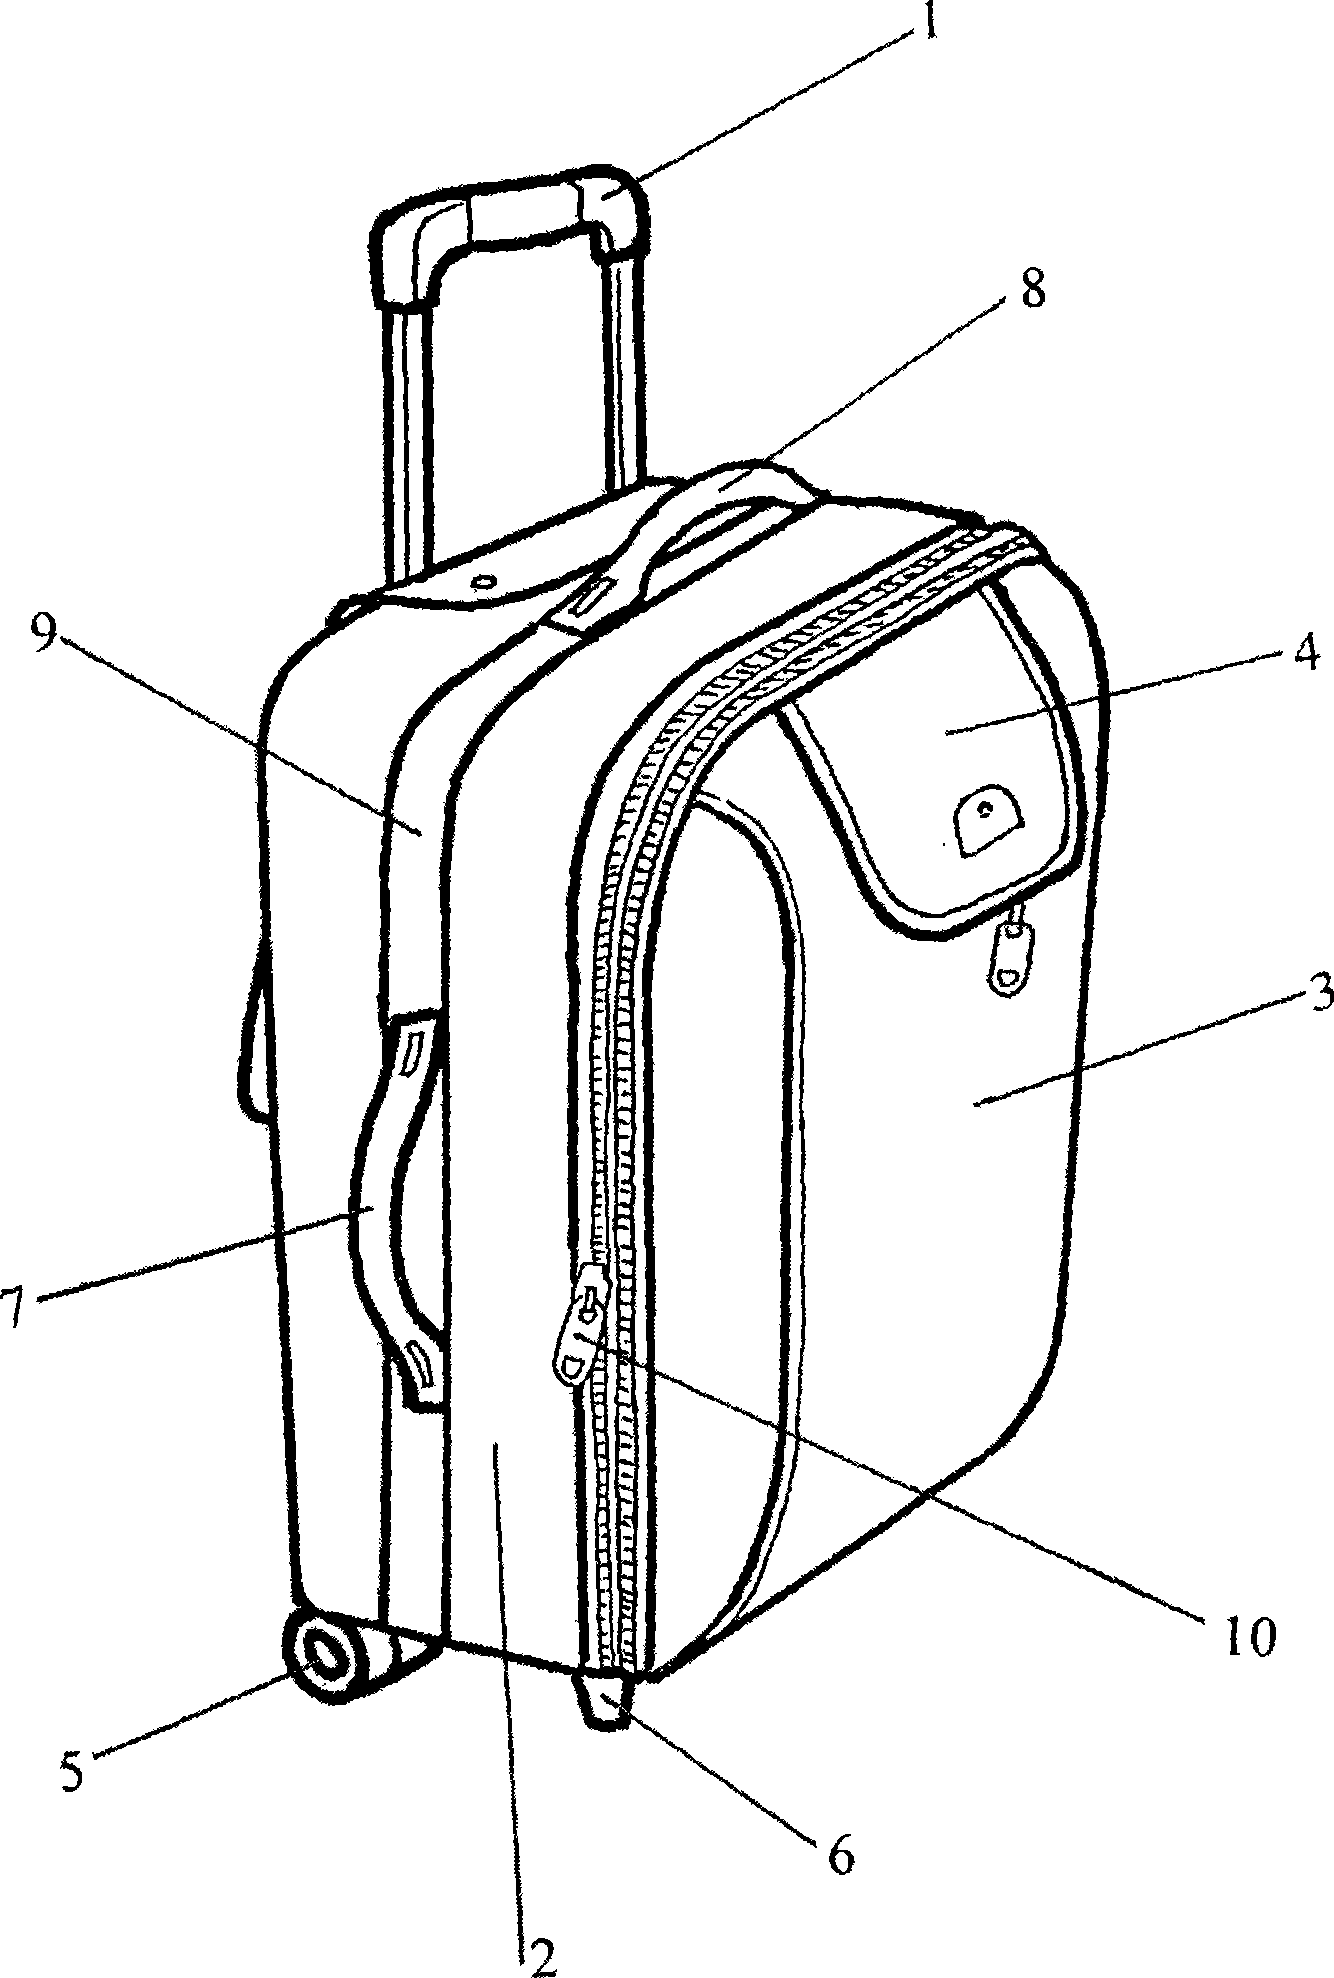 Draw bar box with two back-attached bags